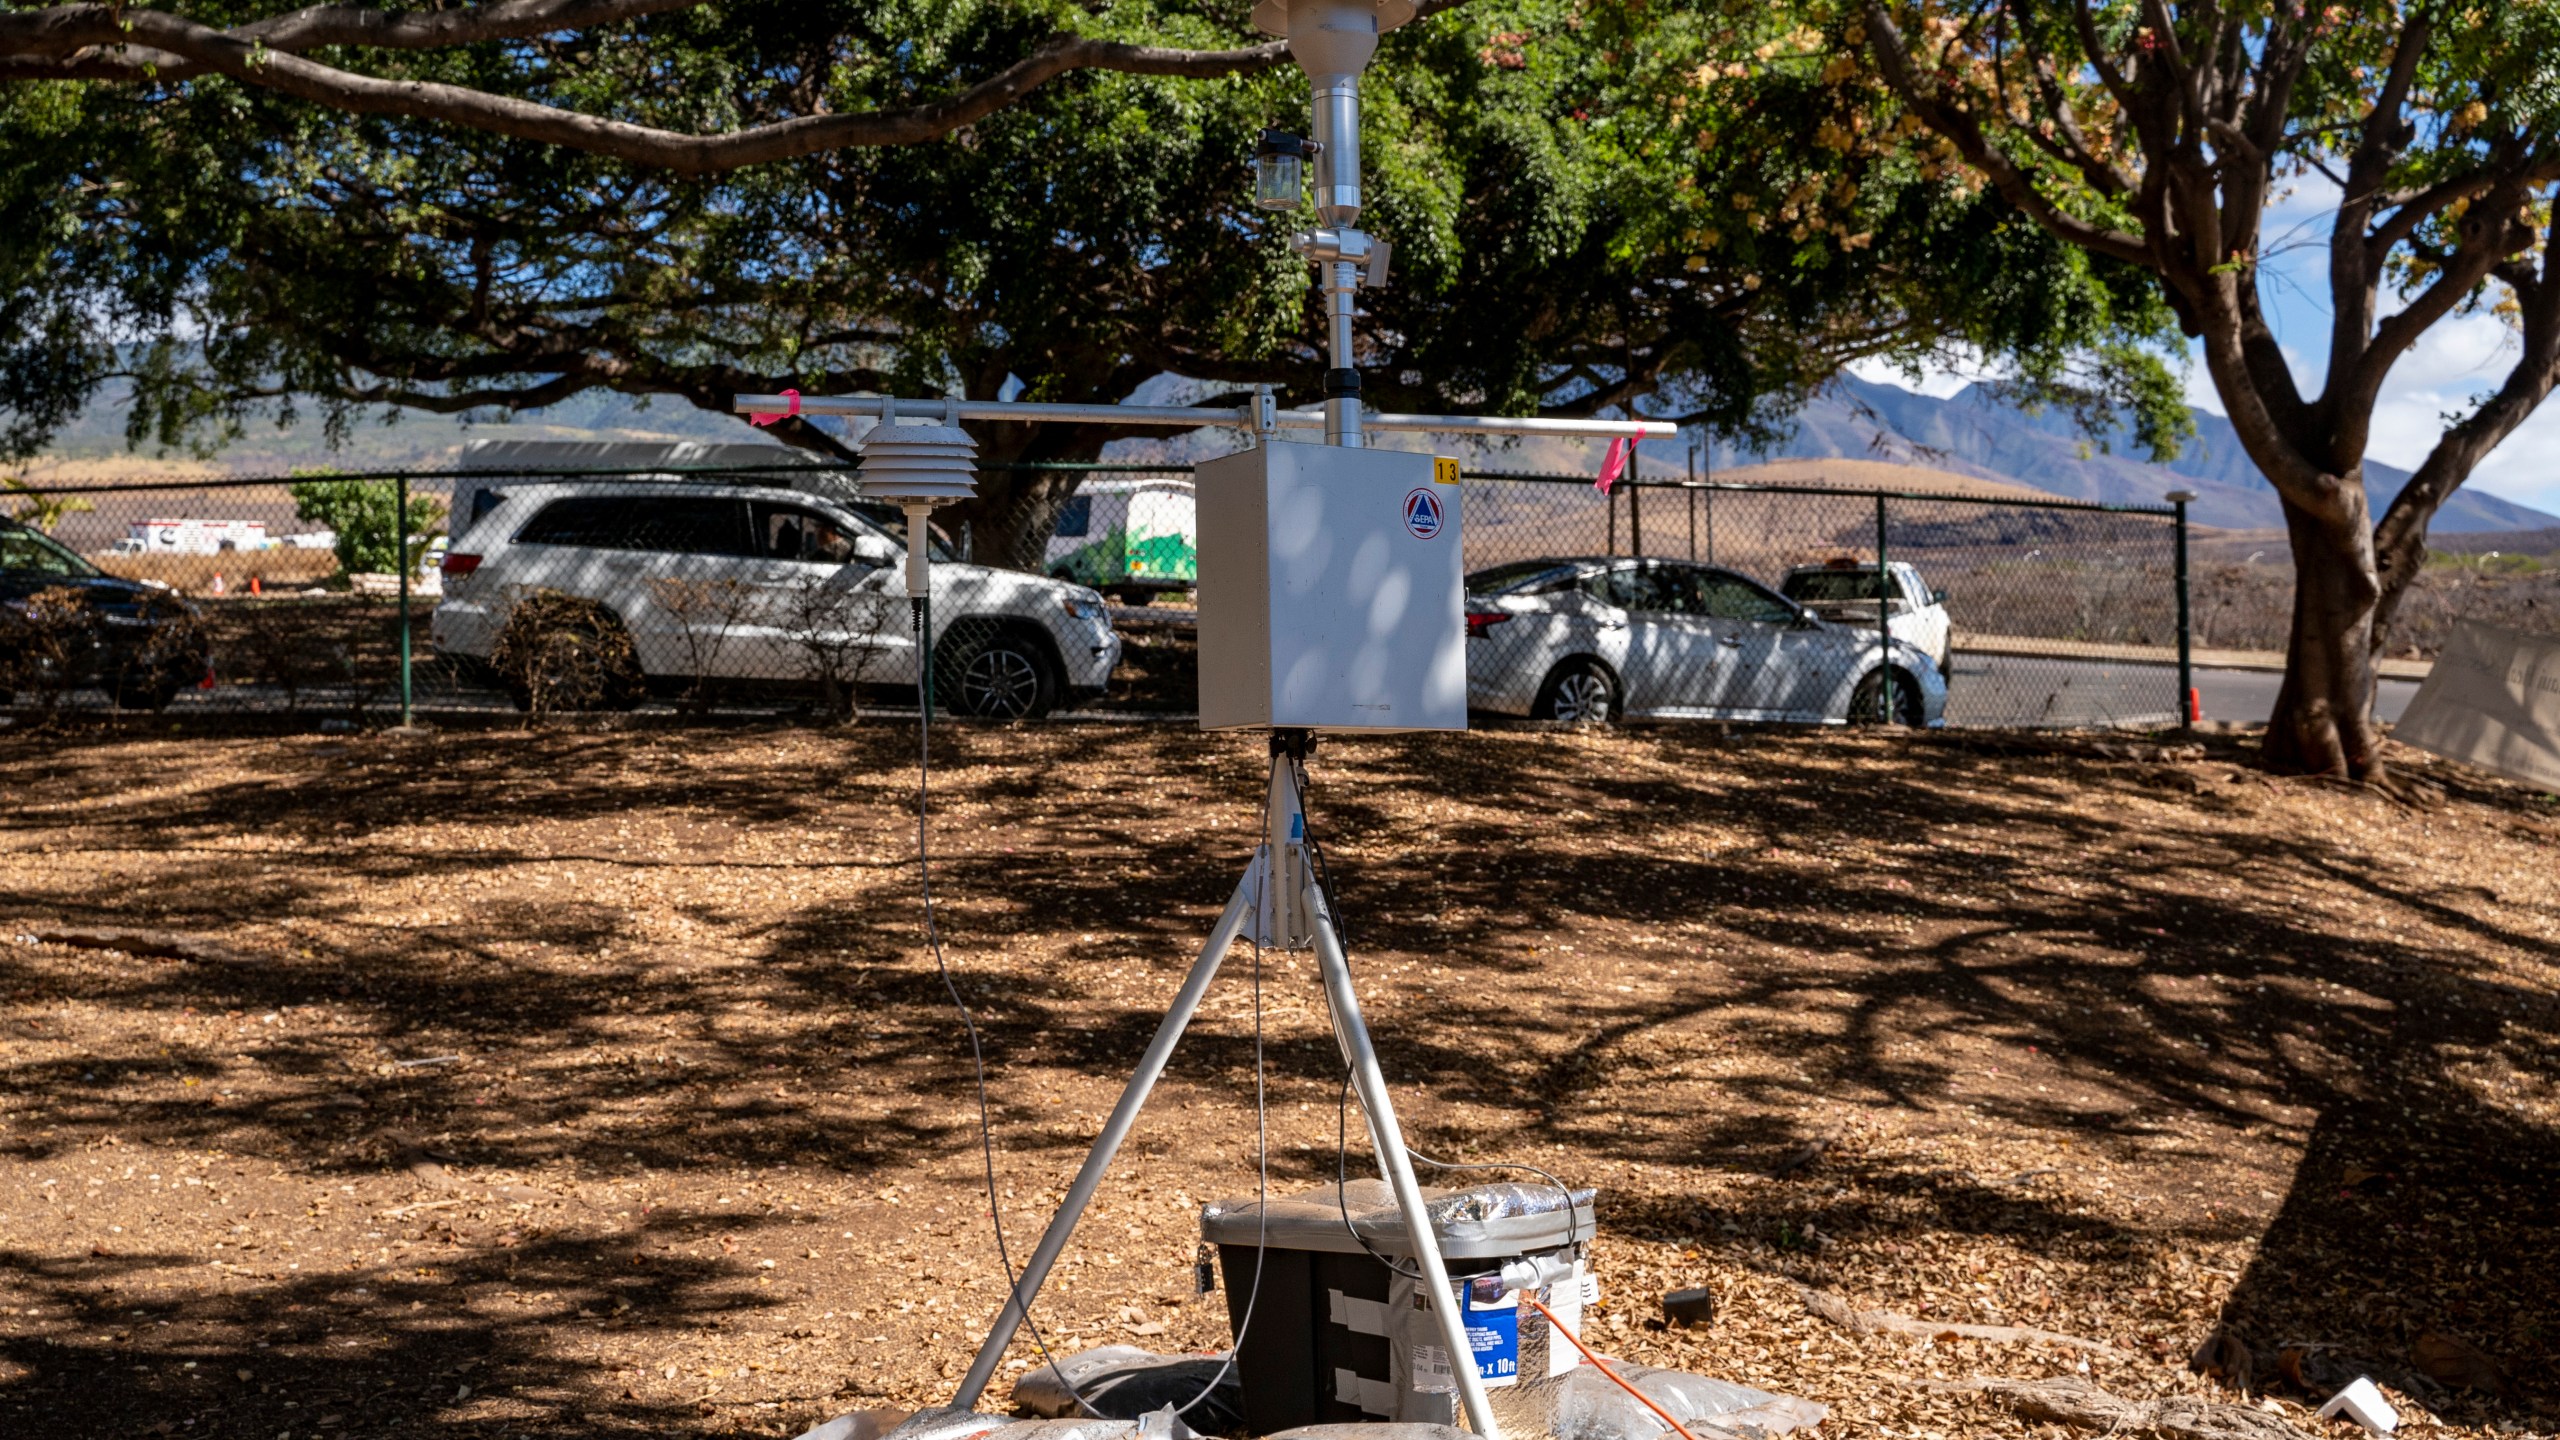 An air quality monitoring sensor is seen at Lahaina Comprehensive Health Center on Friday, Nov. 3, 2023, in Lahaina, Hawaii. Hawaii Department of Health and Environmental Protection Agency installed dozens of PM2.5 sensors in Lahaina and Upcountry Maui following the wildfire. (AP Photo/Mengshin Lin)